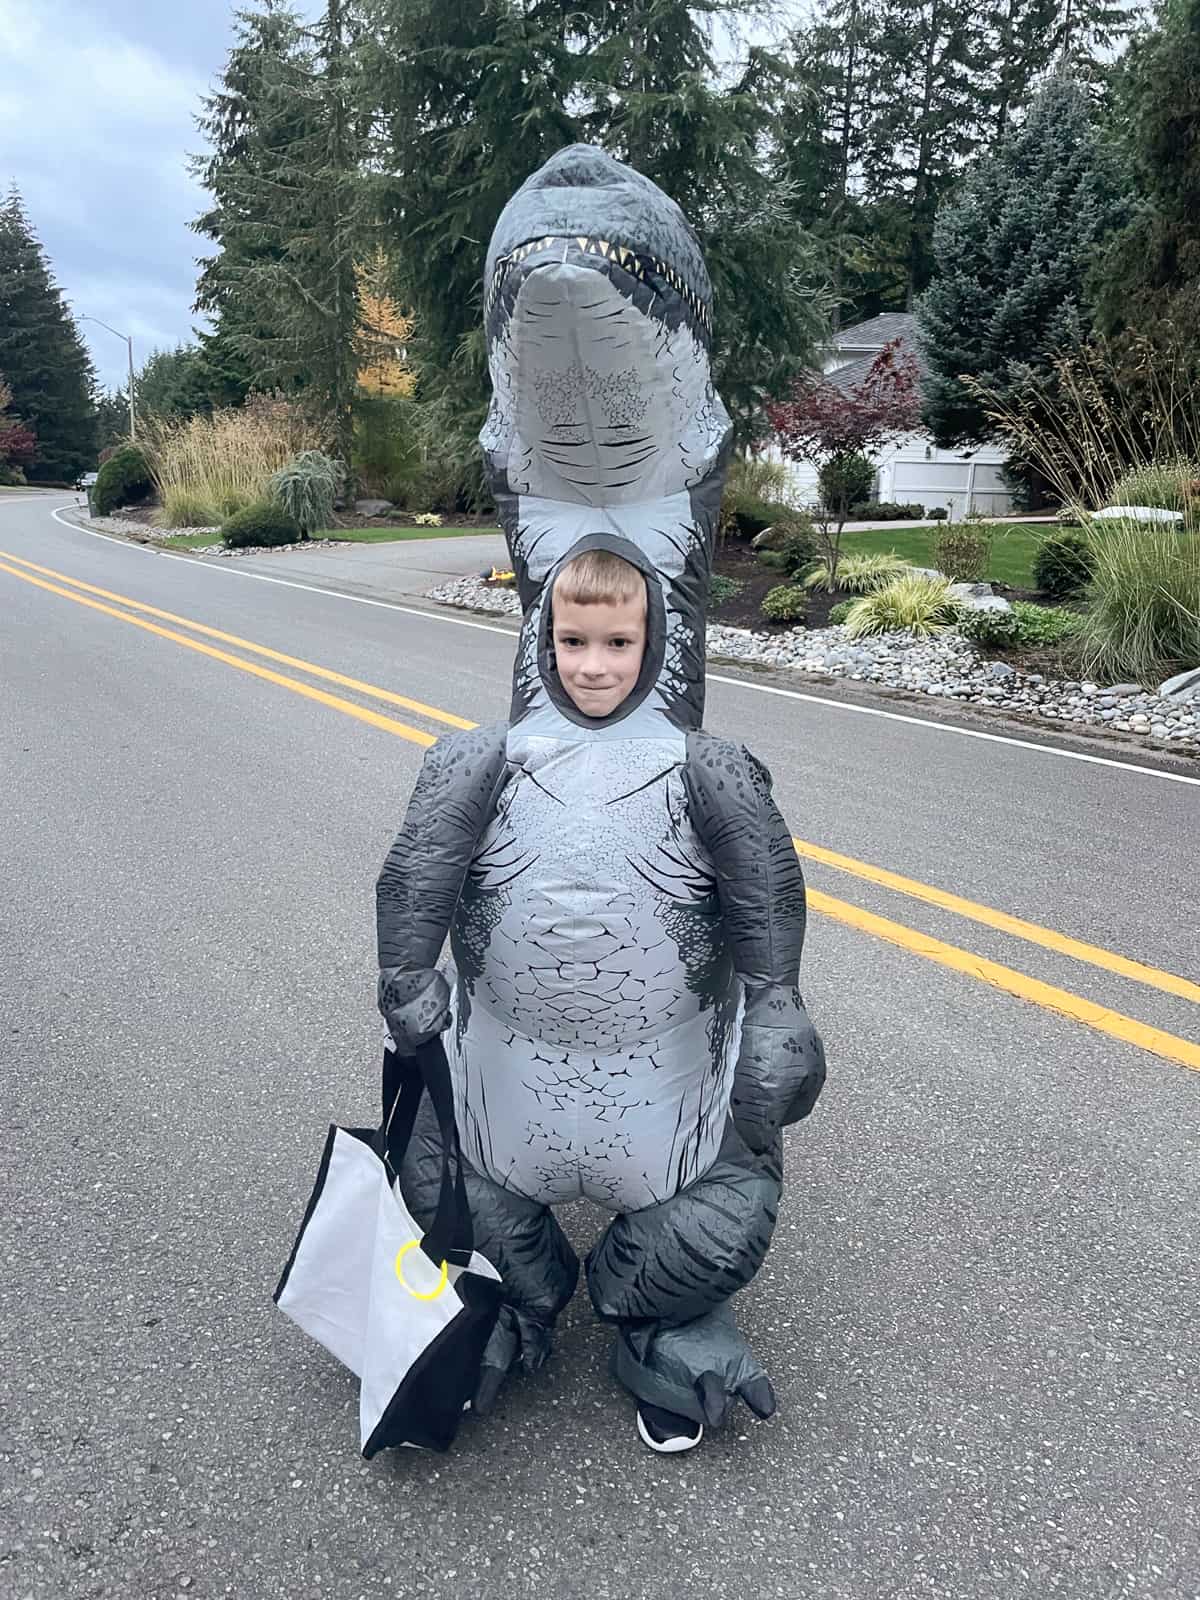 a small kid trick-or-treating in a blow up dinosaur costume.